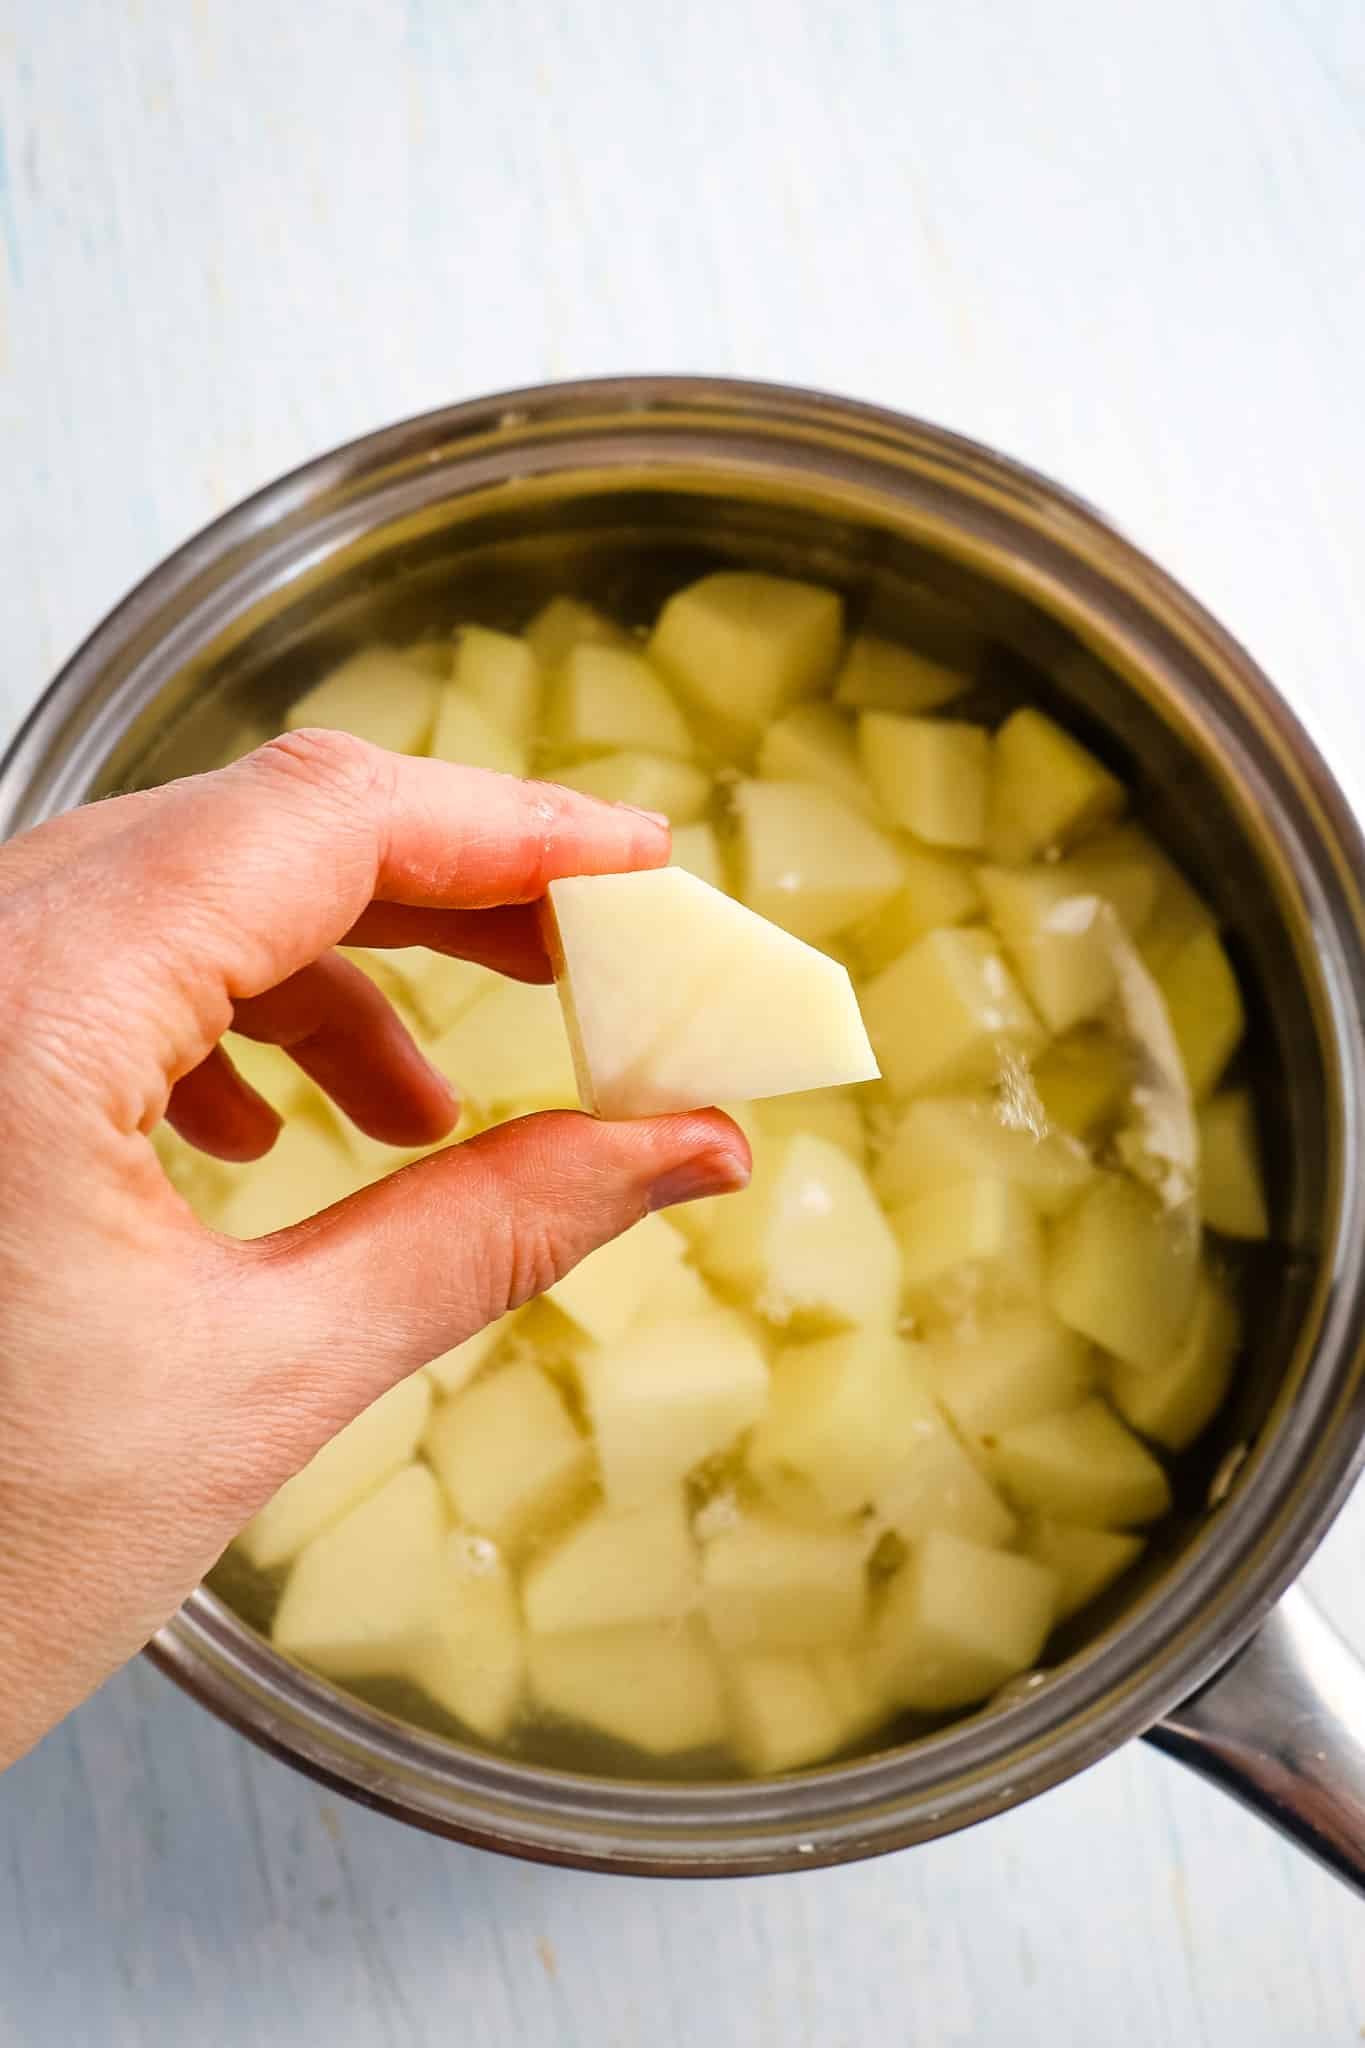 Piece of potato held in hand to show how big to cut potatoes for making parmesan mashed potatoes.